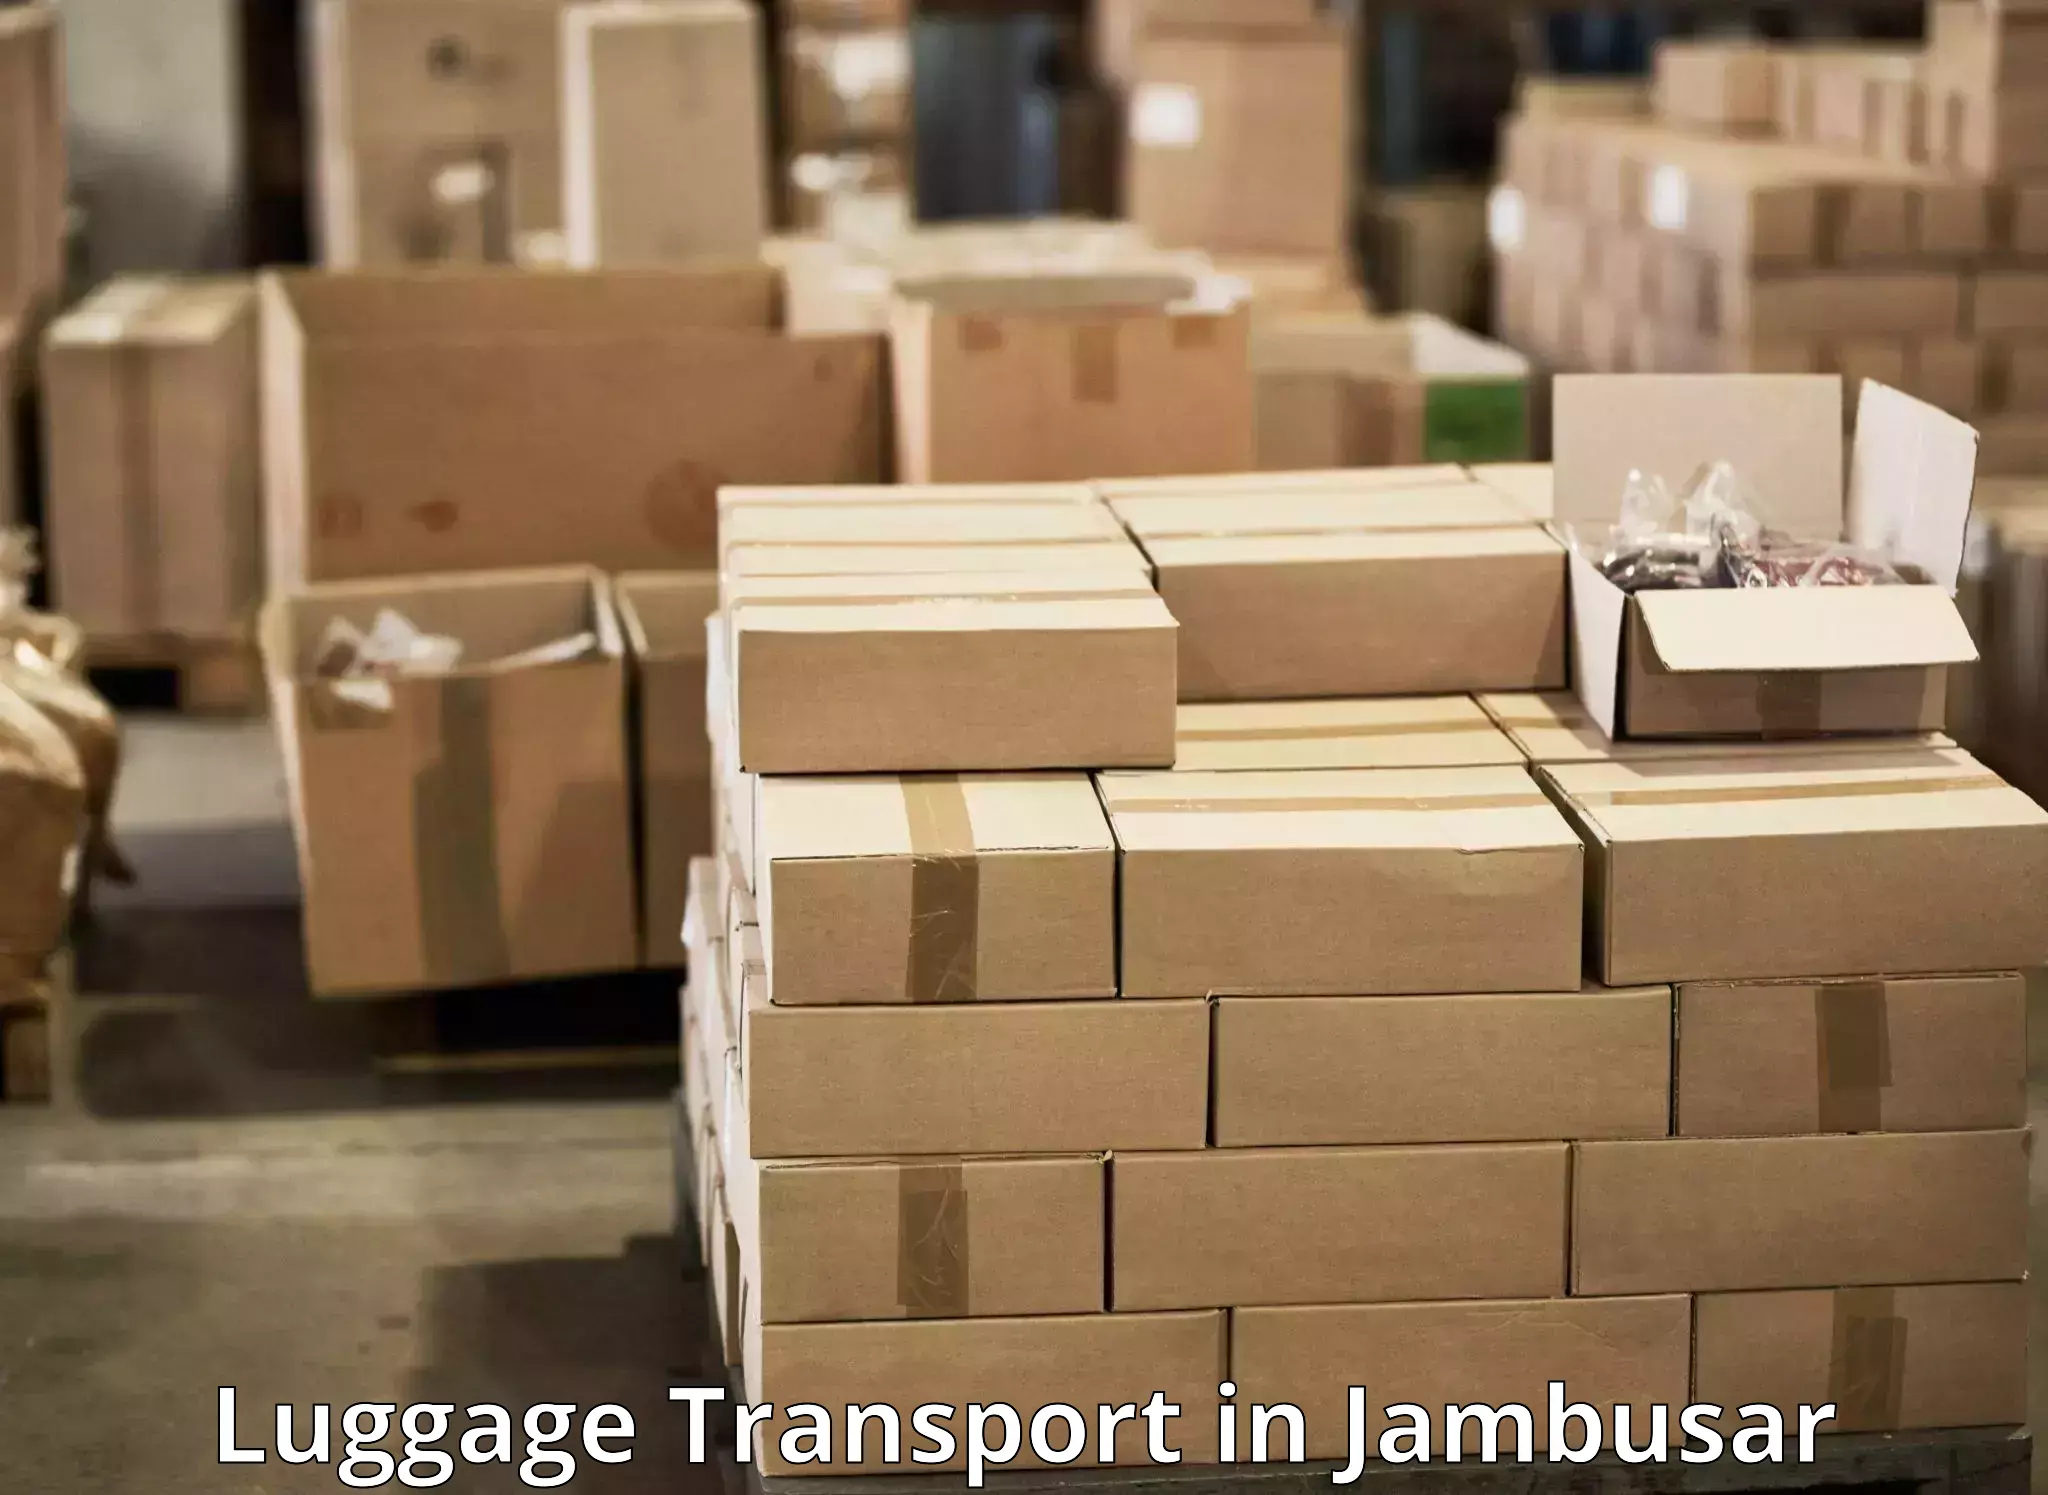 Luggage transport operations in Jambusar